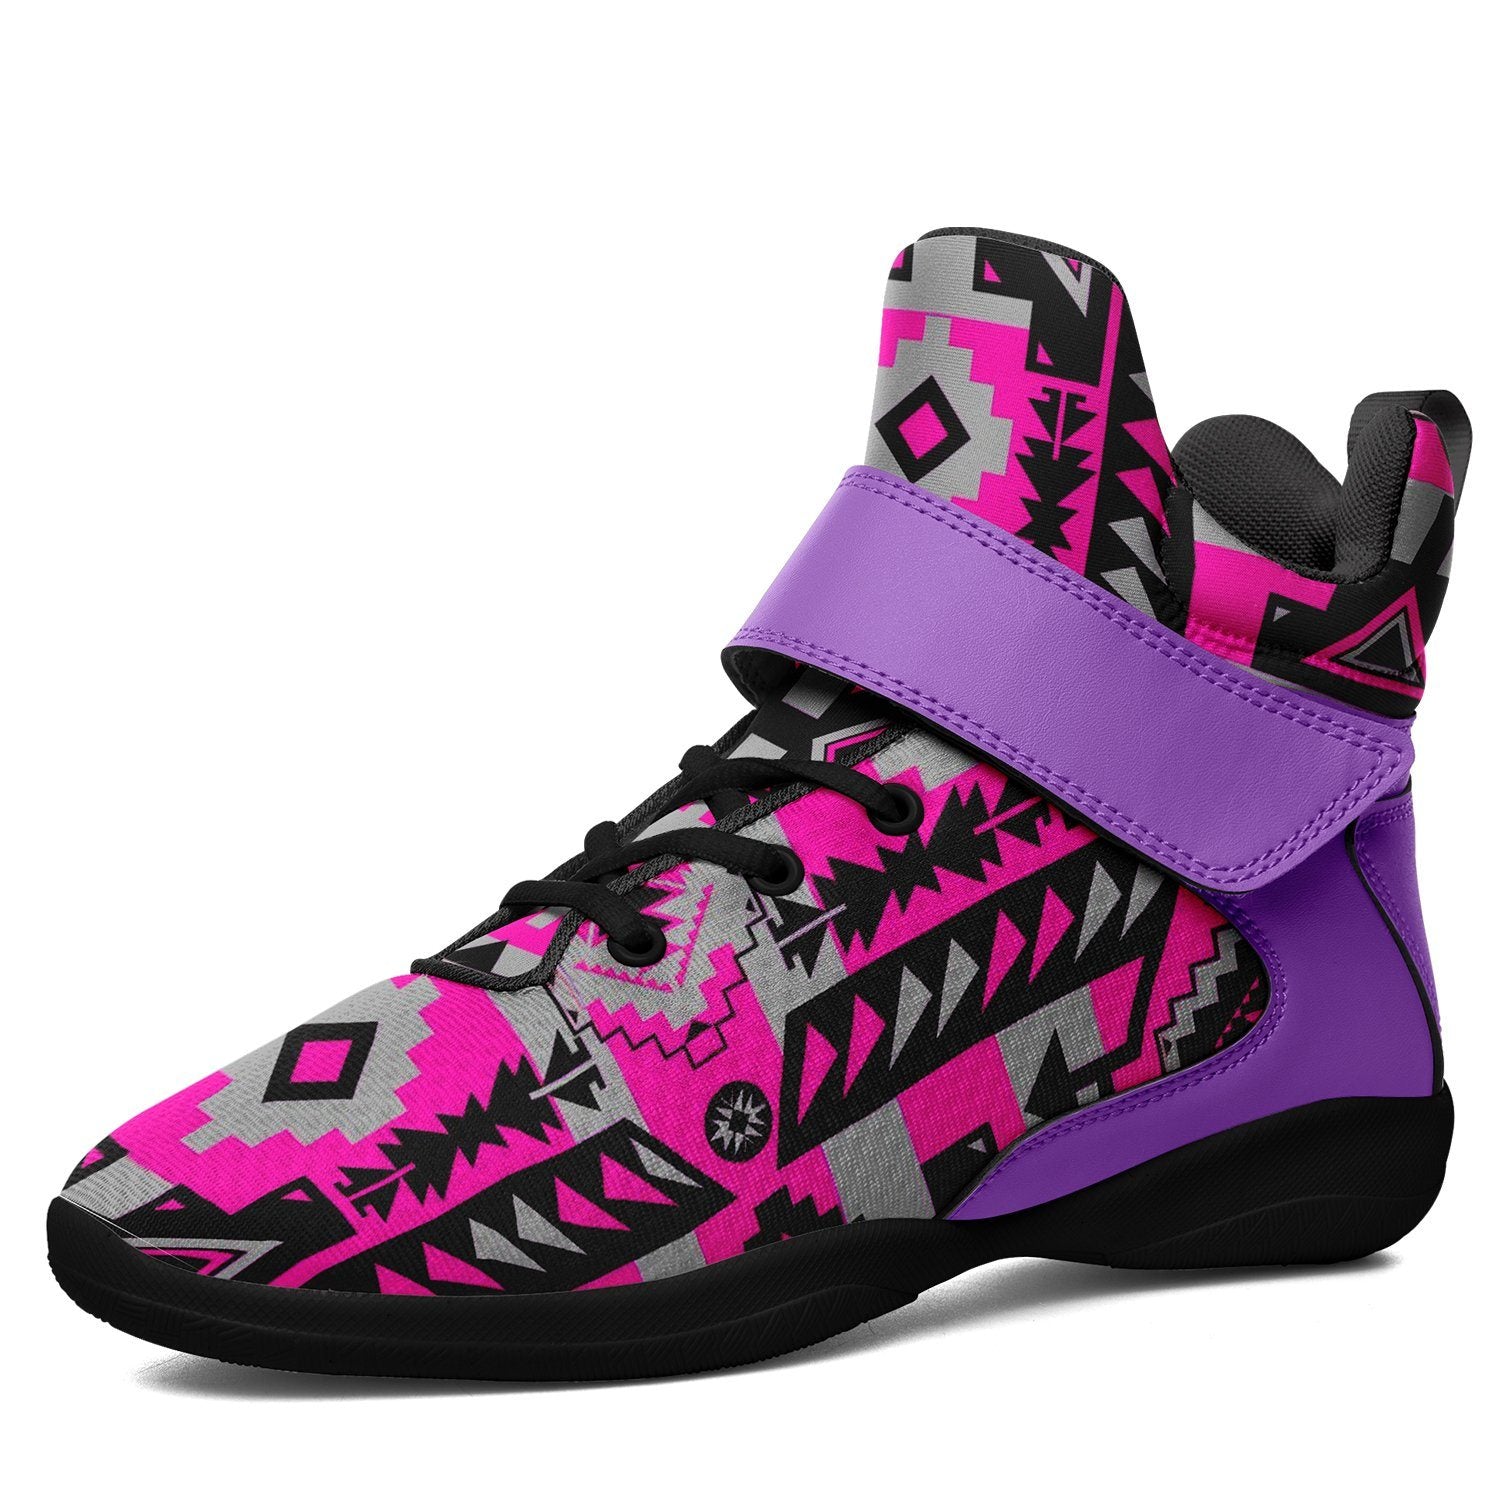 Chiefs Mountain Sunset Ipottaa Basketball / Sport High Top Shoes 49 Dzine US Child 12.5 / EUR 30 Black Sole with Lavender Strap 